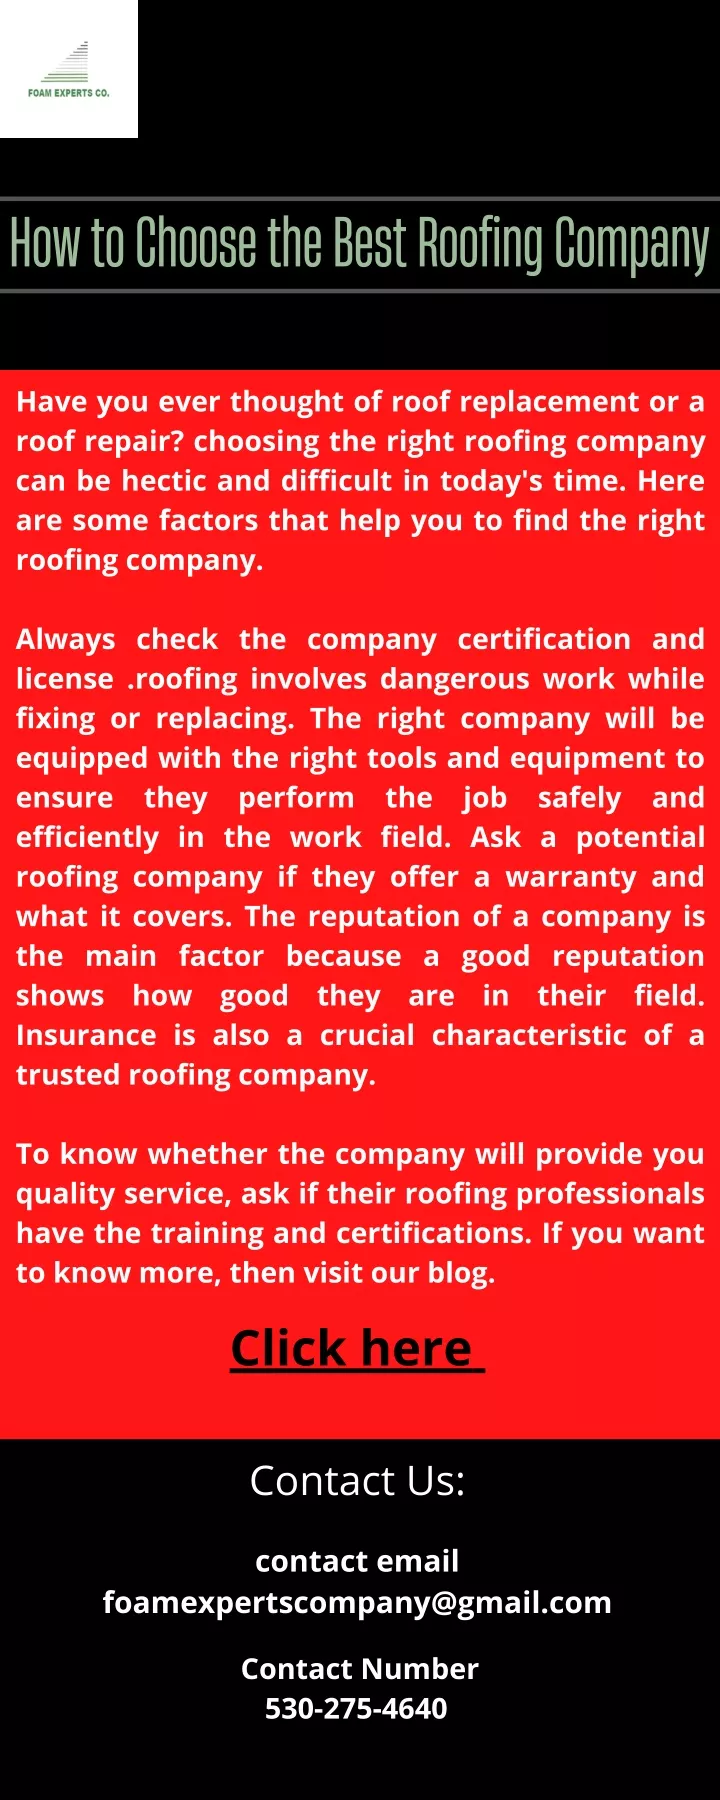 add a heading how to choose the best roofing